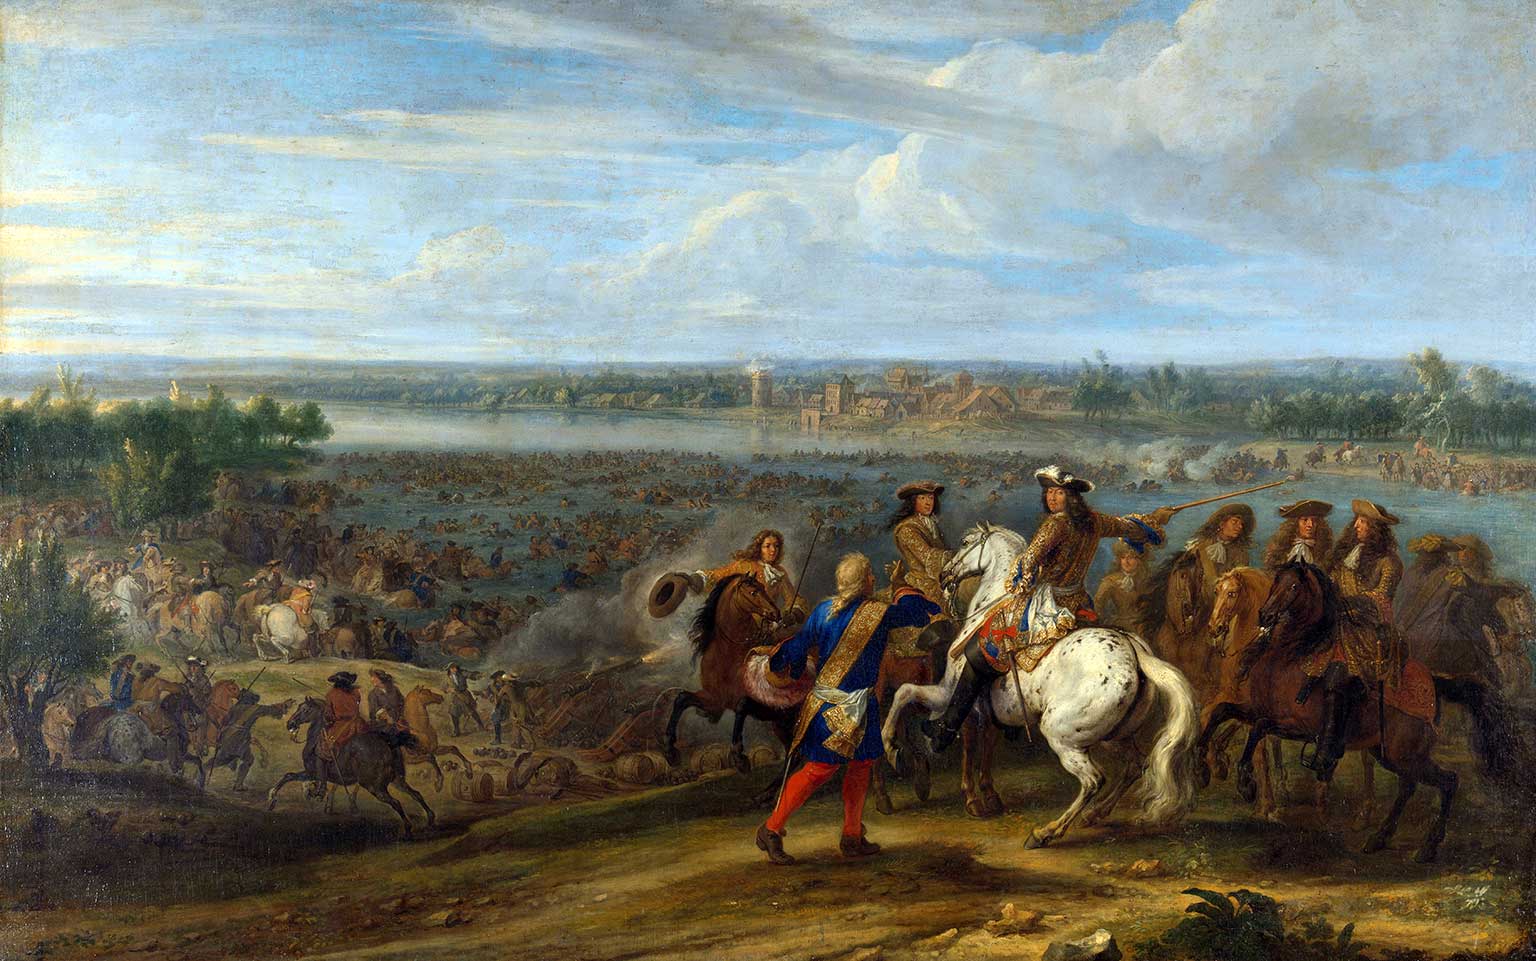 Louis XIV of France crosses the Rhine at Lobith in 1672, painting by Adam Frans van der Meulen